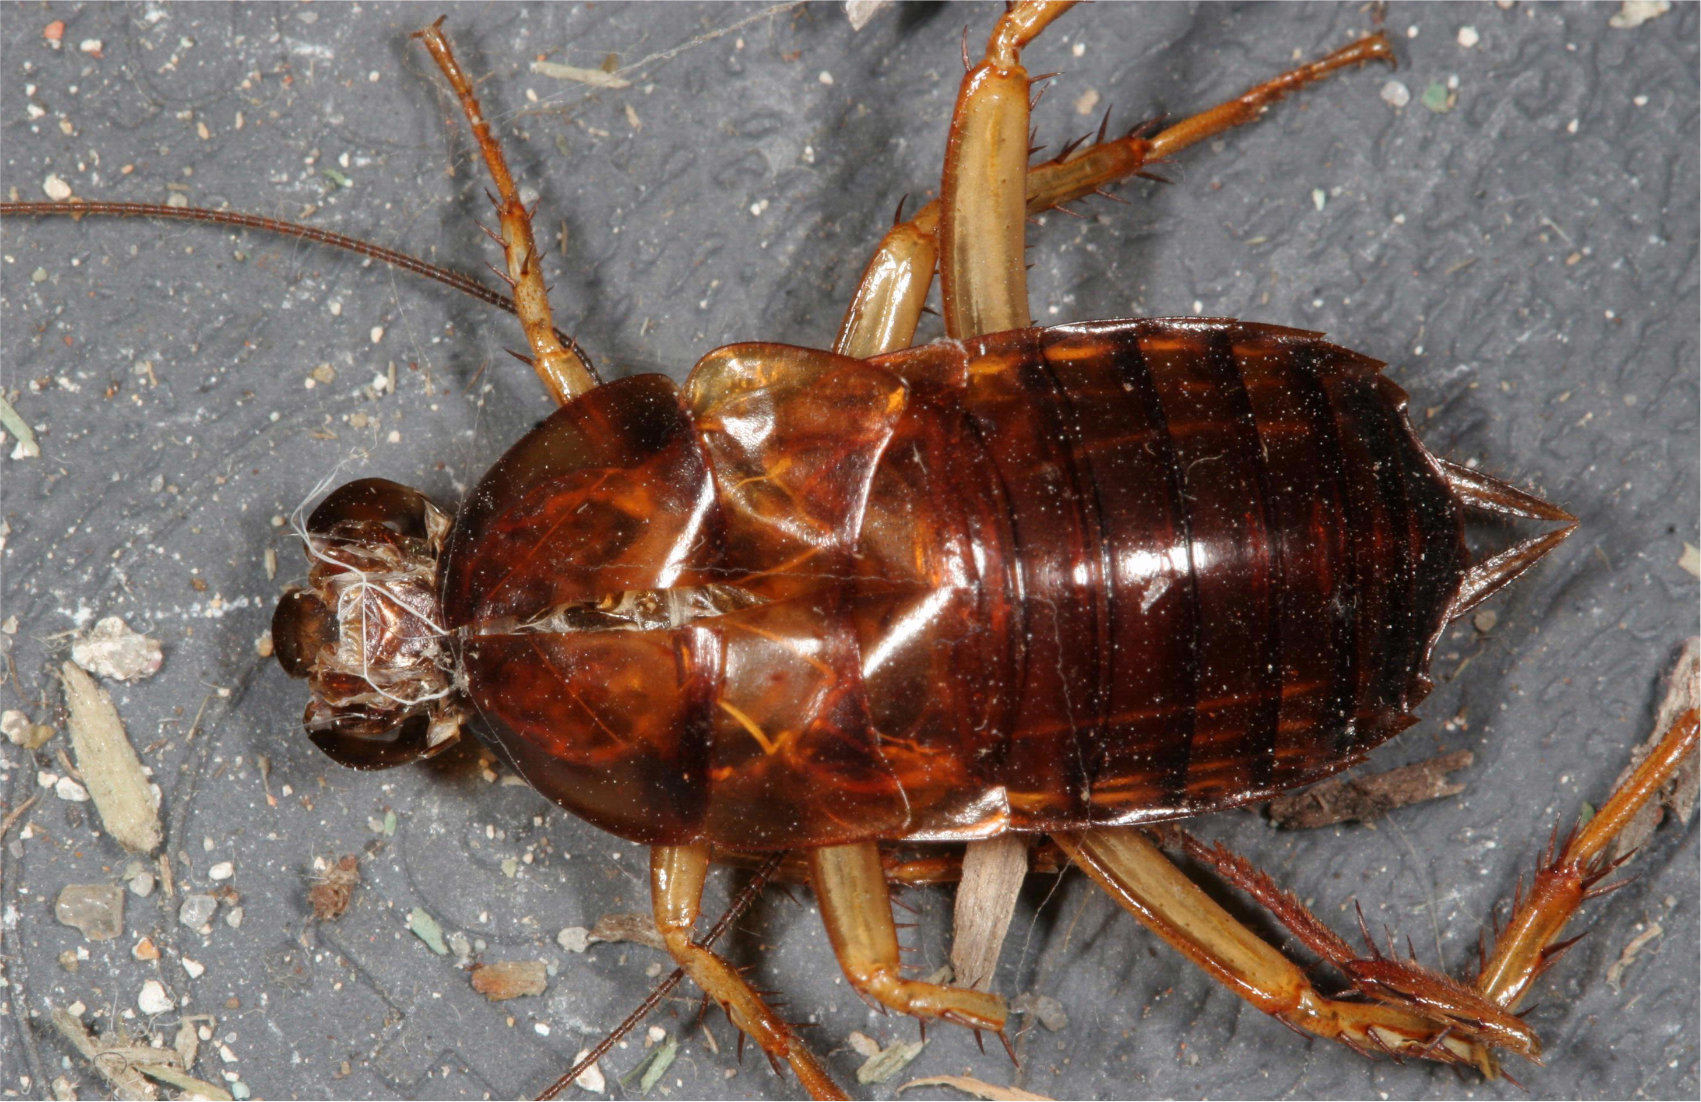 An image of a dead baby American roach